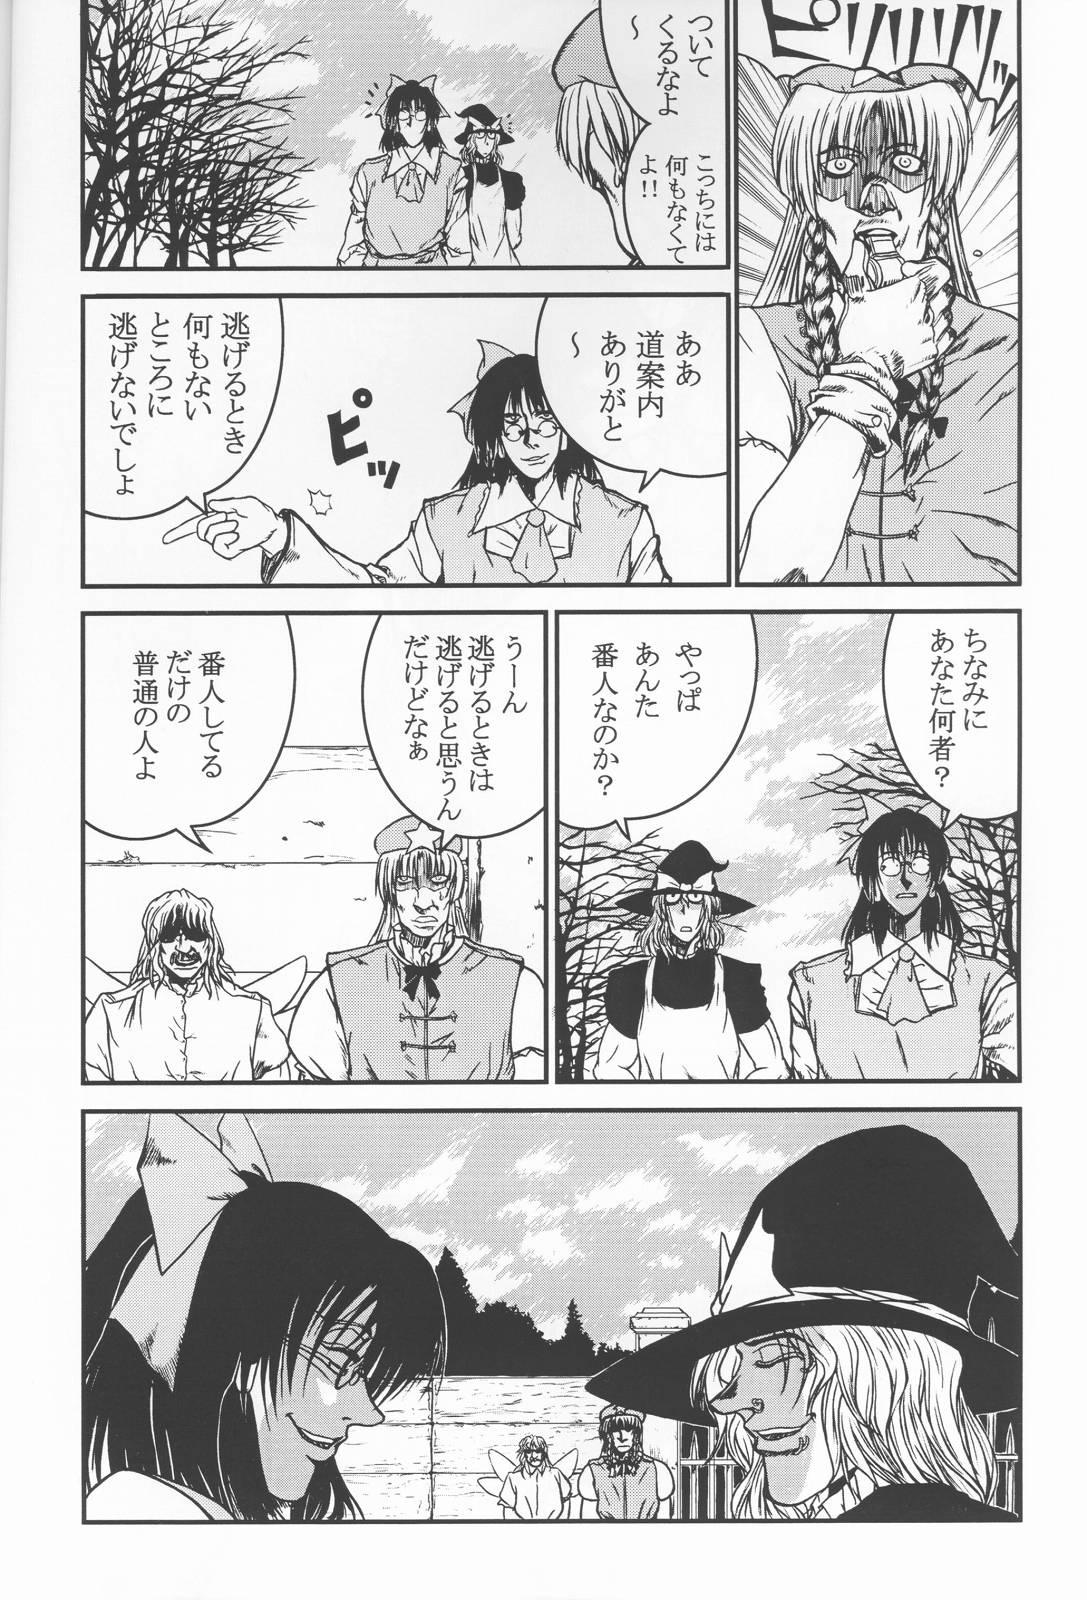 Bedroom HELLSING？ - Touhou project Hunks - Page 7